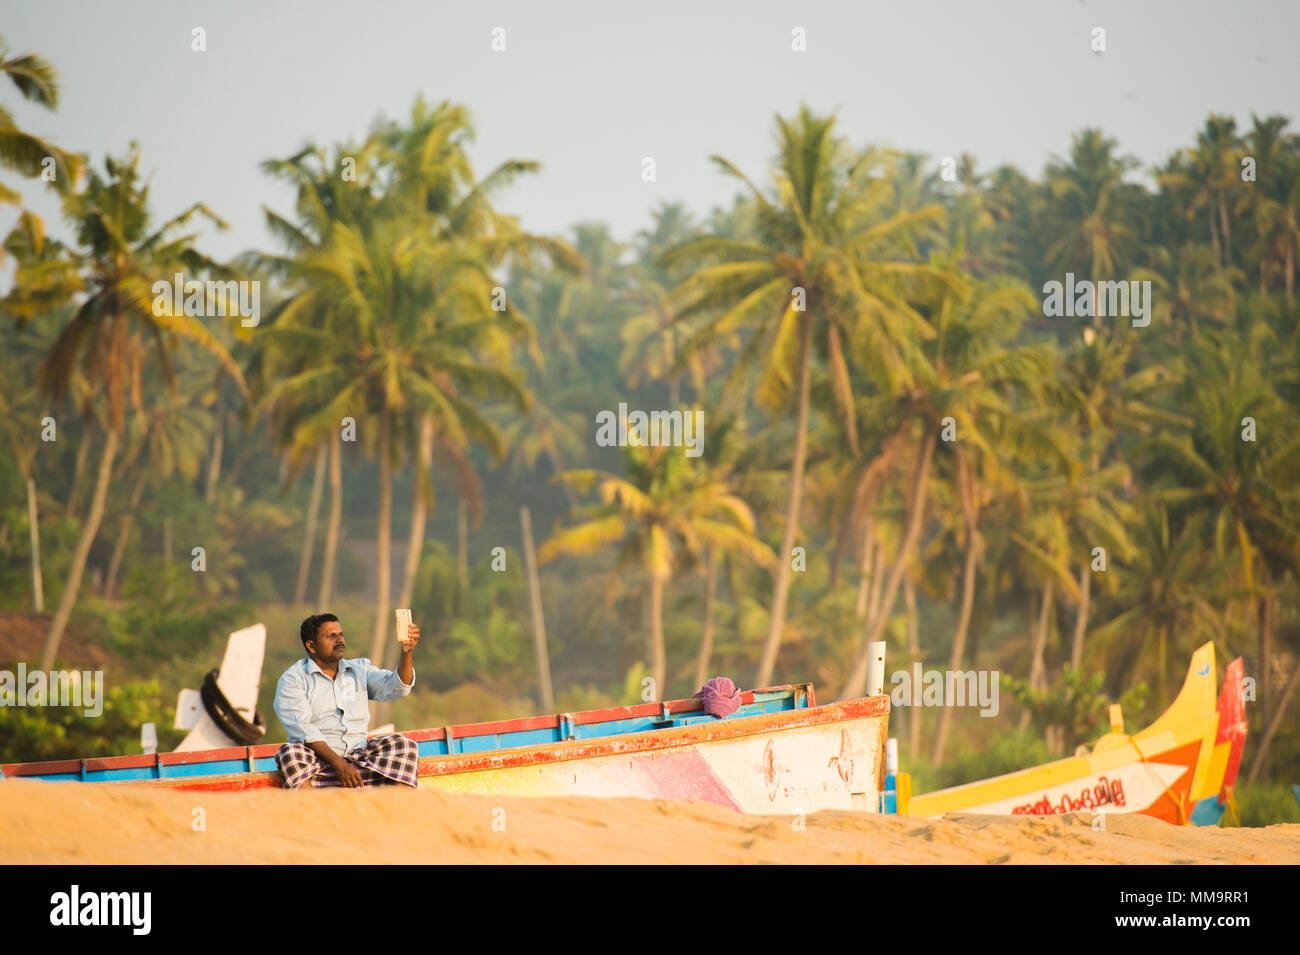 VARKALA - KERALA - INDIA - 31 JANUARY 2018. A man sitting on a wooden boat is taking a selfie on the beach of Varkala at Sunset. Kerala state, India. Stock Photo